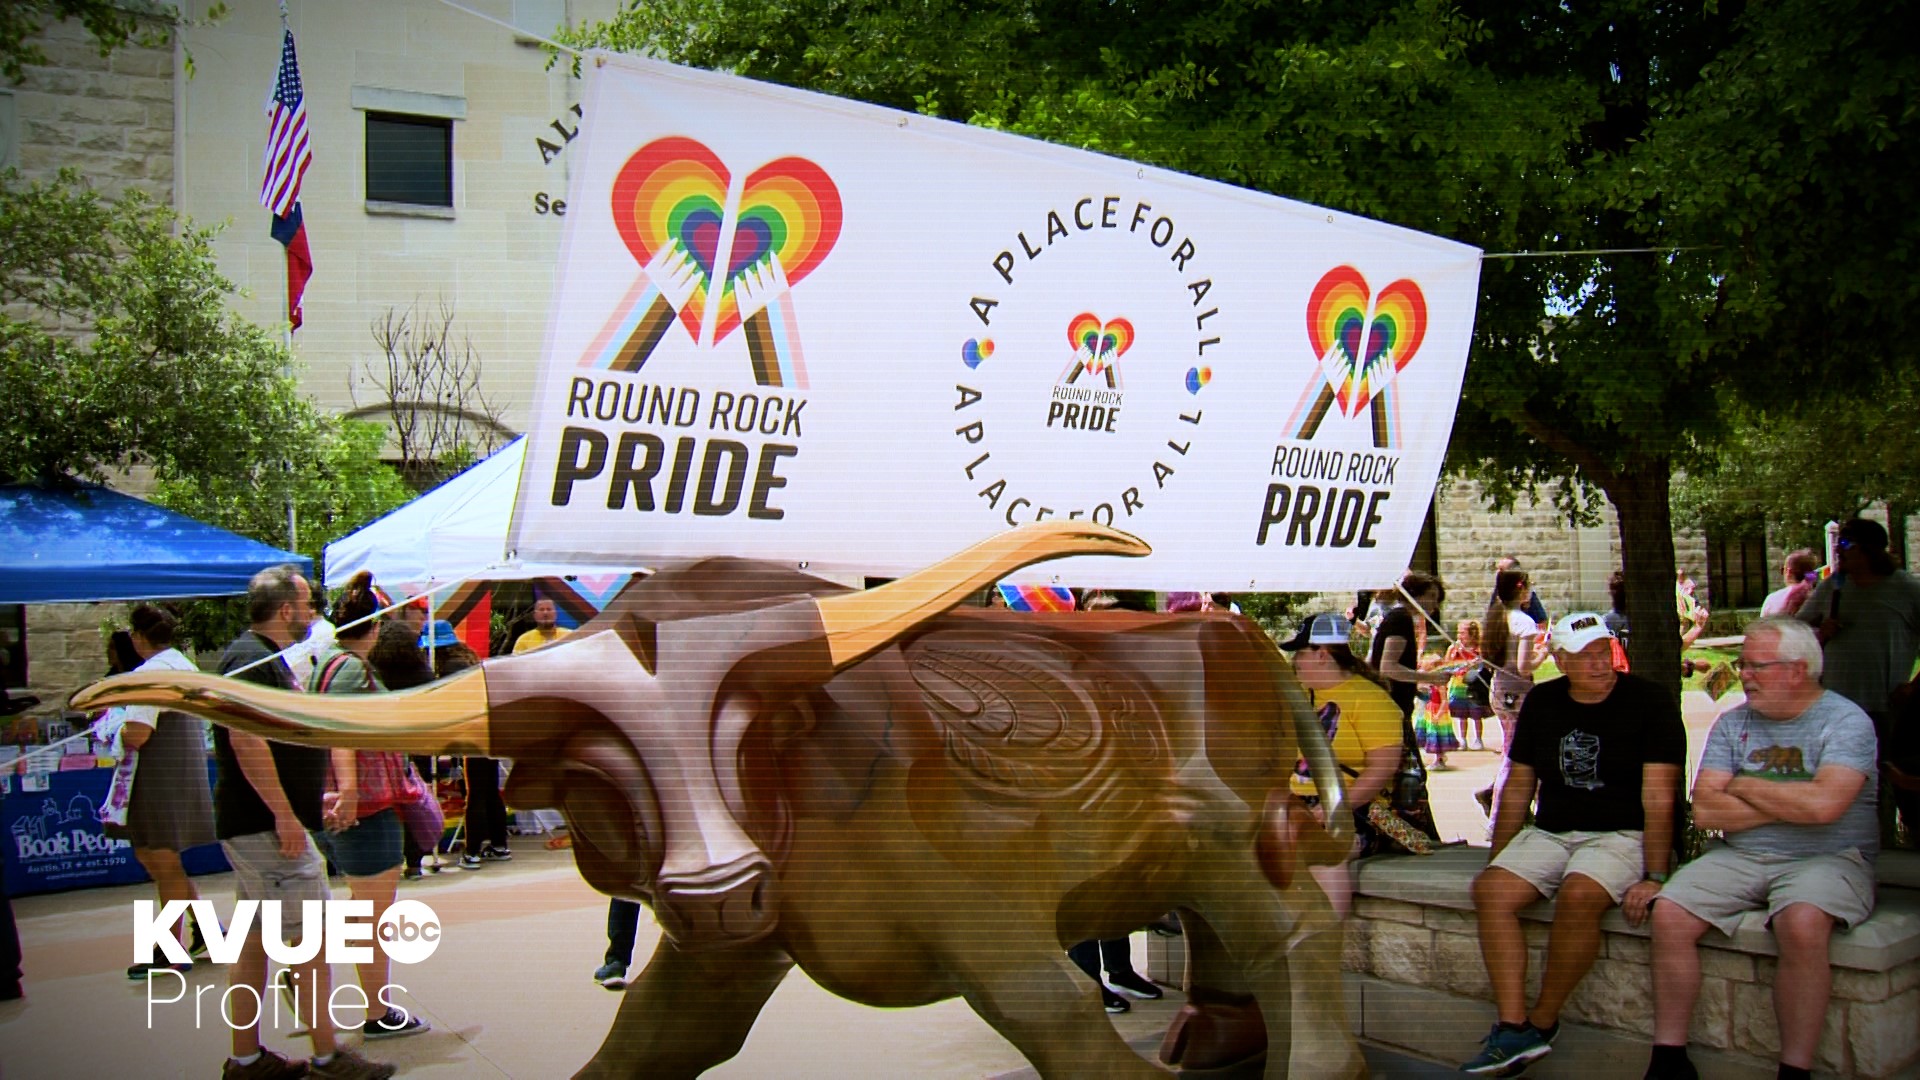 The Pride movement isn’t just thriving in the big cities – it’s also spreading throughout smaller communities in Central Texas. But it wasn't always this way.